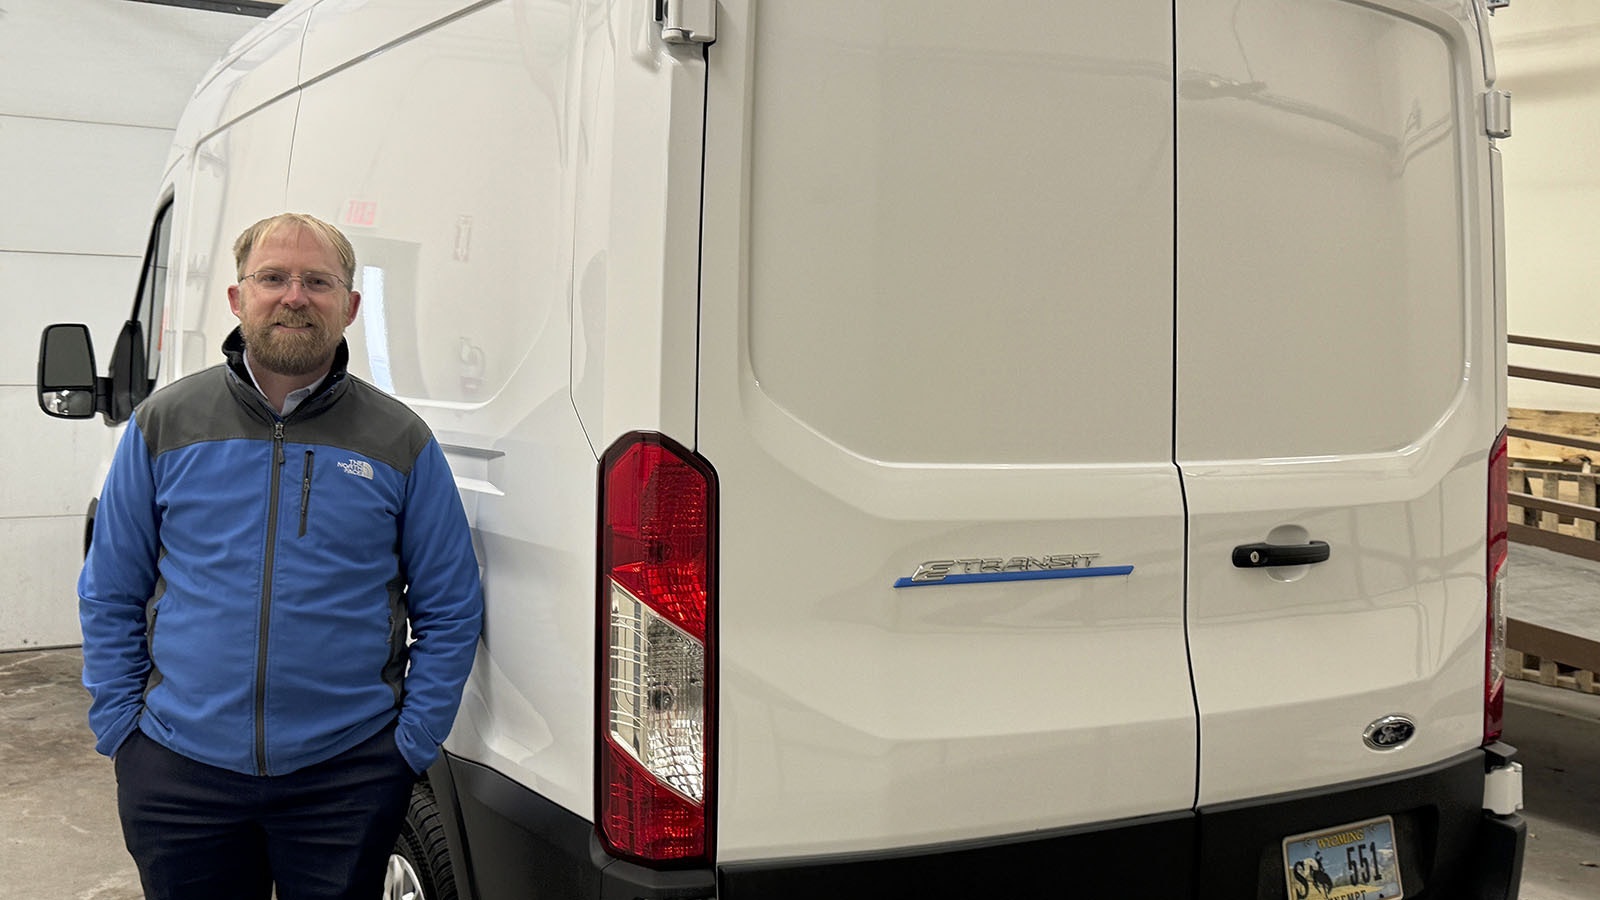 Andrew Kuhlmann, administrator of Wyoming’s General Services Division, said the state recently added a second electric-powered cargo van to its fleet used to move mail from its central facility on18th Street. Kuhlmann stands next to the new van, which cost $57,046.